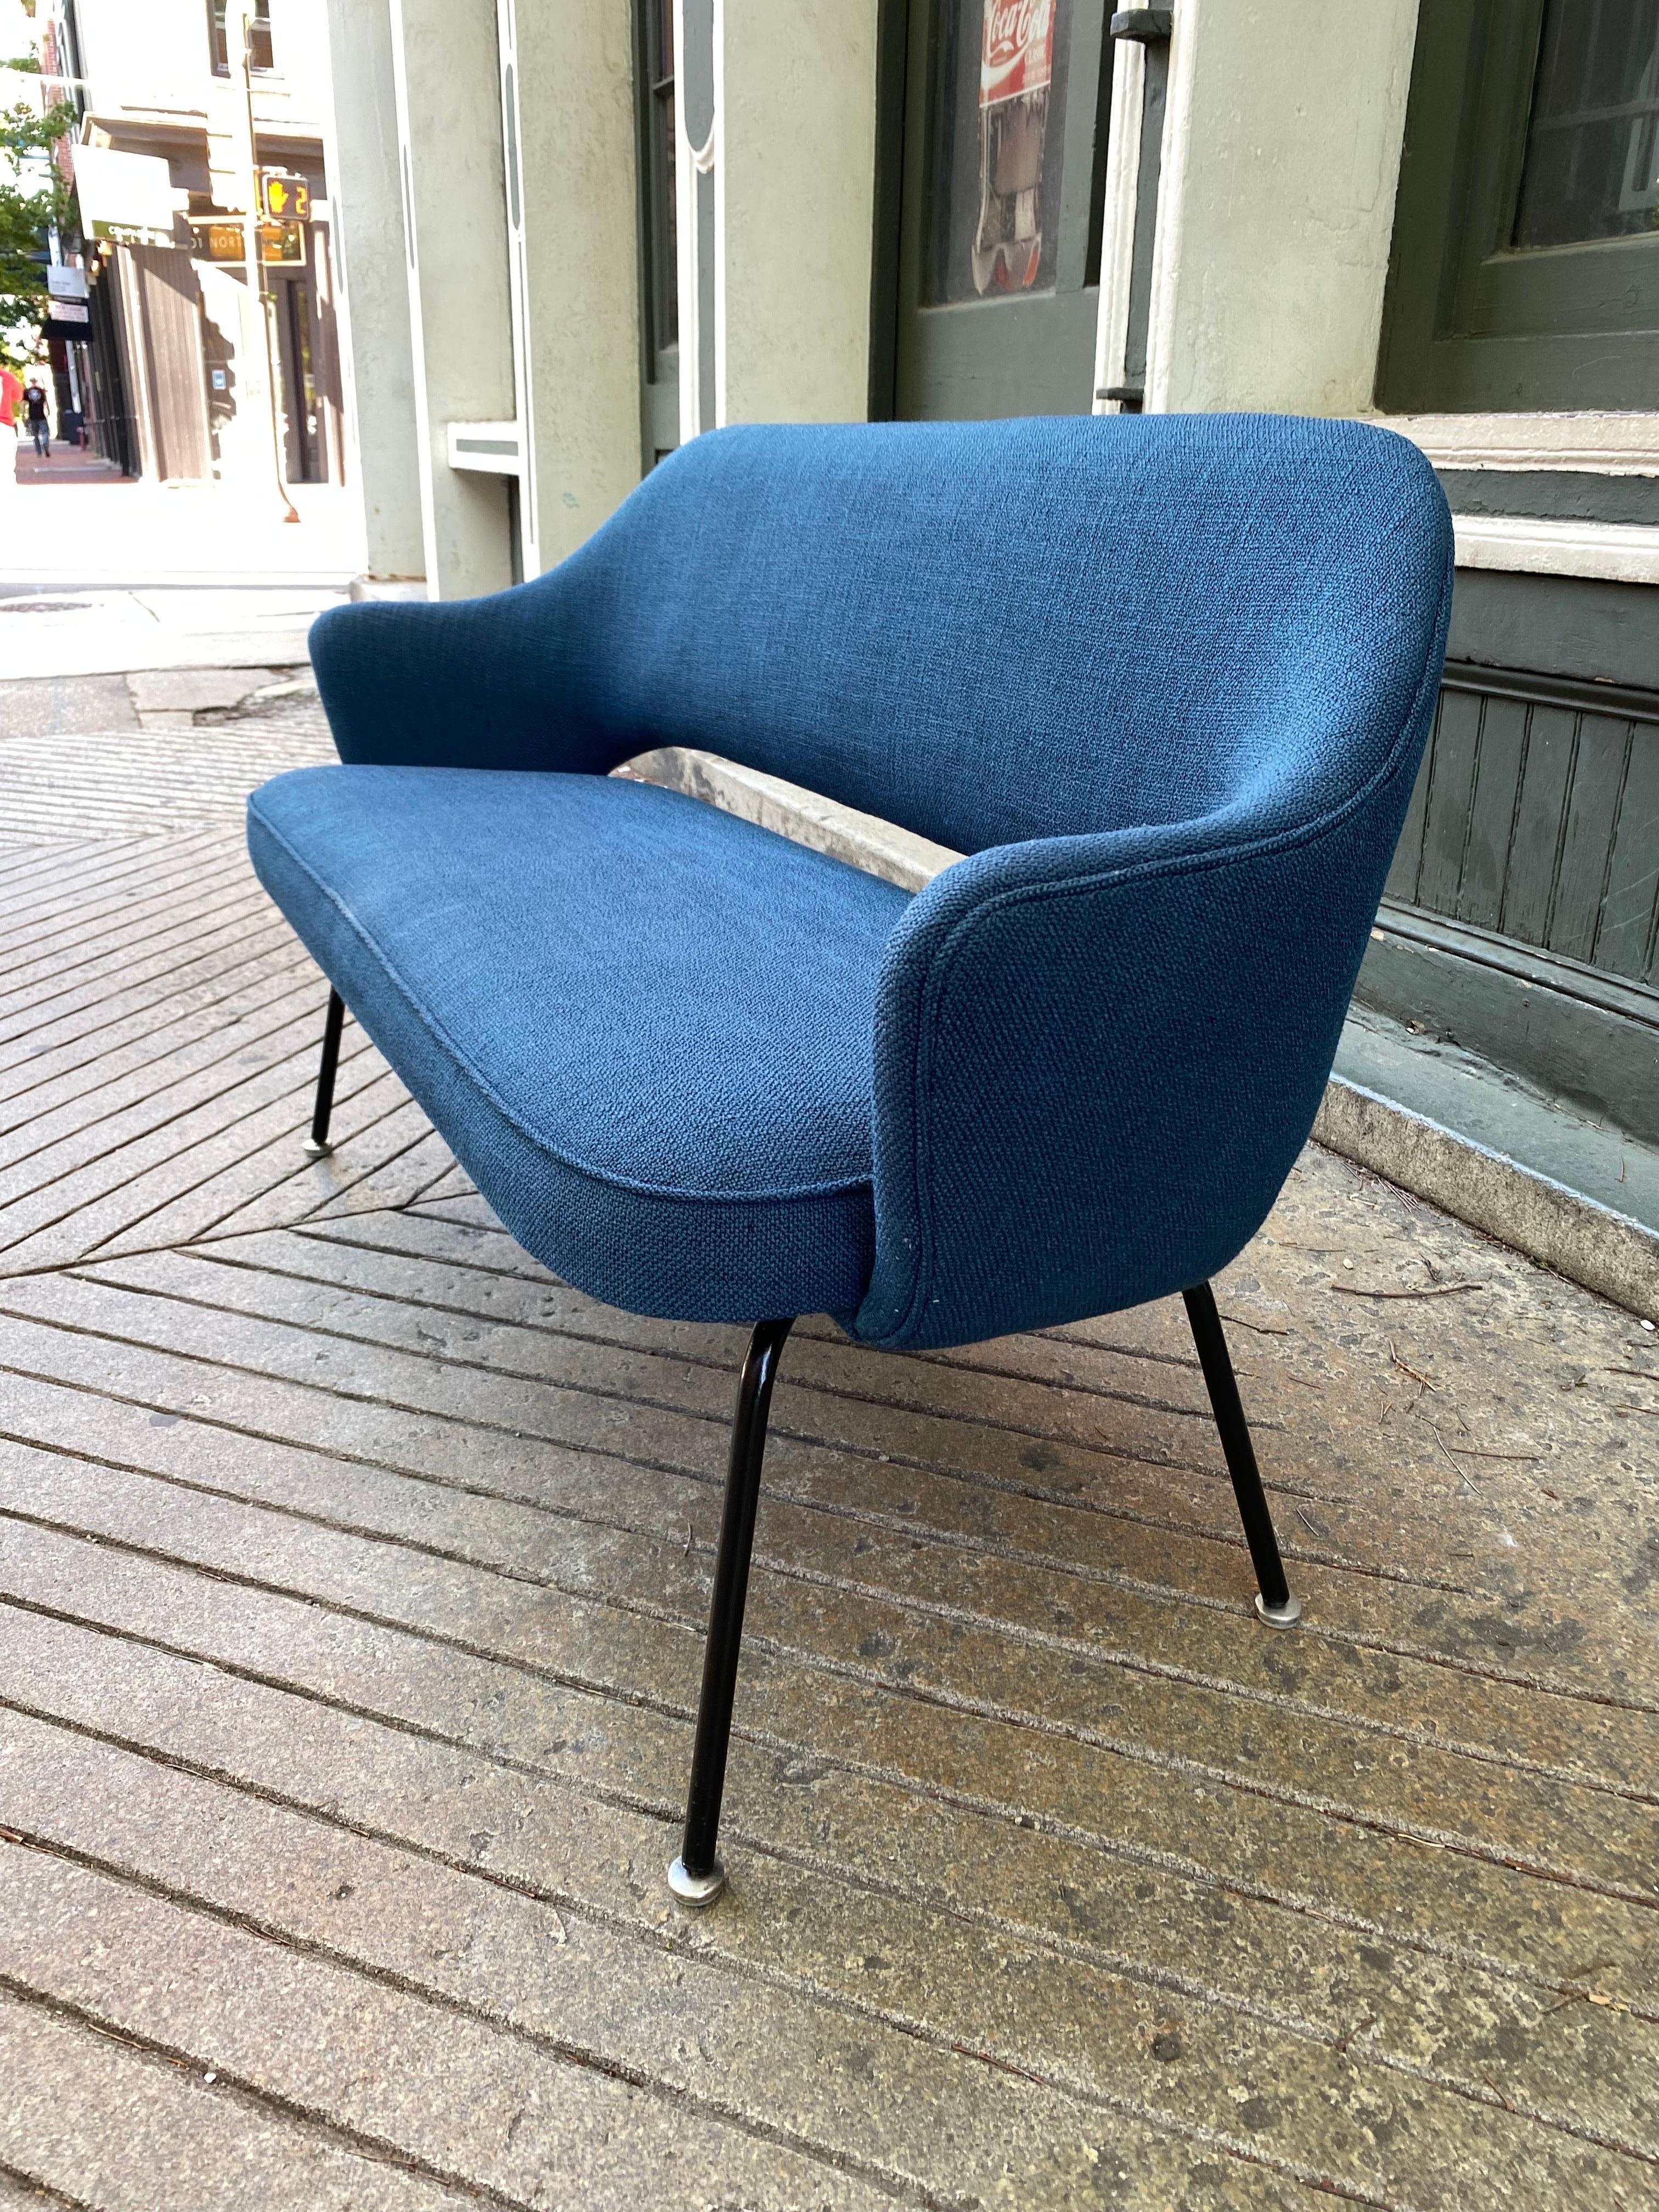 We are very excited to offer Saarinen Inspired Loveseats! Built from existing armchairs, these loveseats are sliced and wood added to enlarge to current size. My very clever Upholsterer has been redoing Knoll Womb Chairs and Loveseats for years and